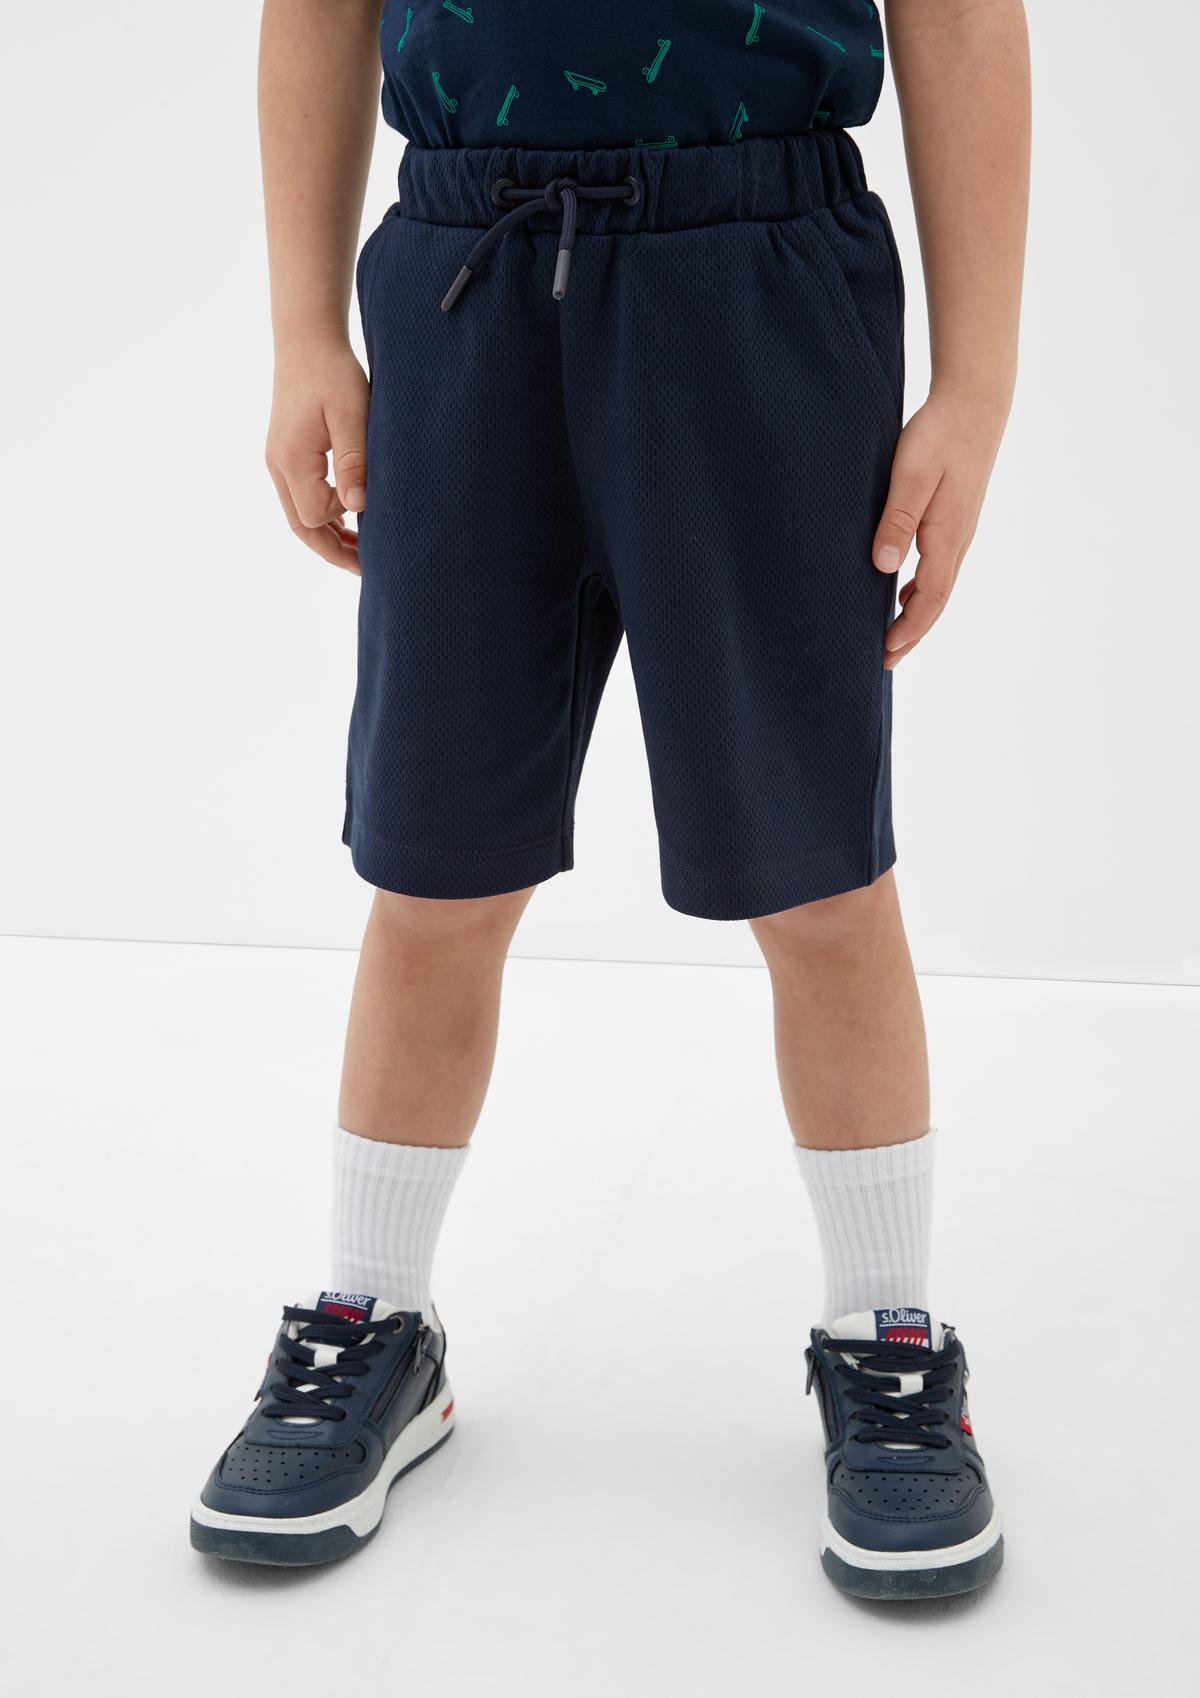 and boys shorts Find online for teens Bermuda